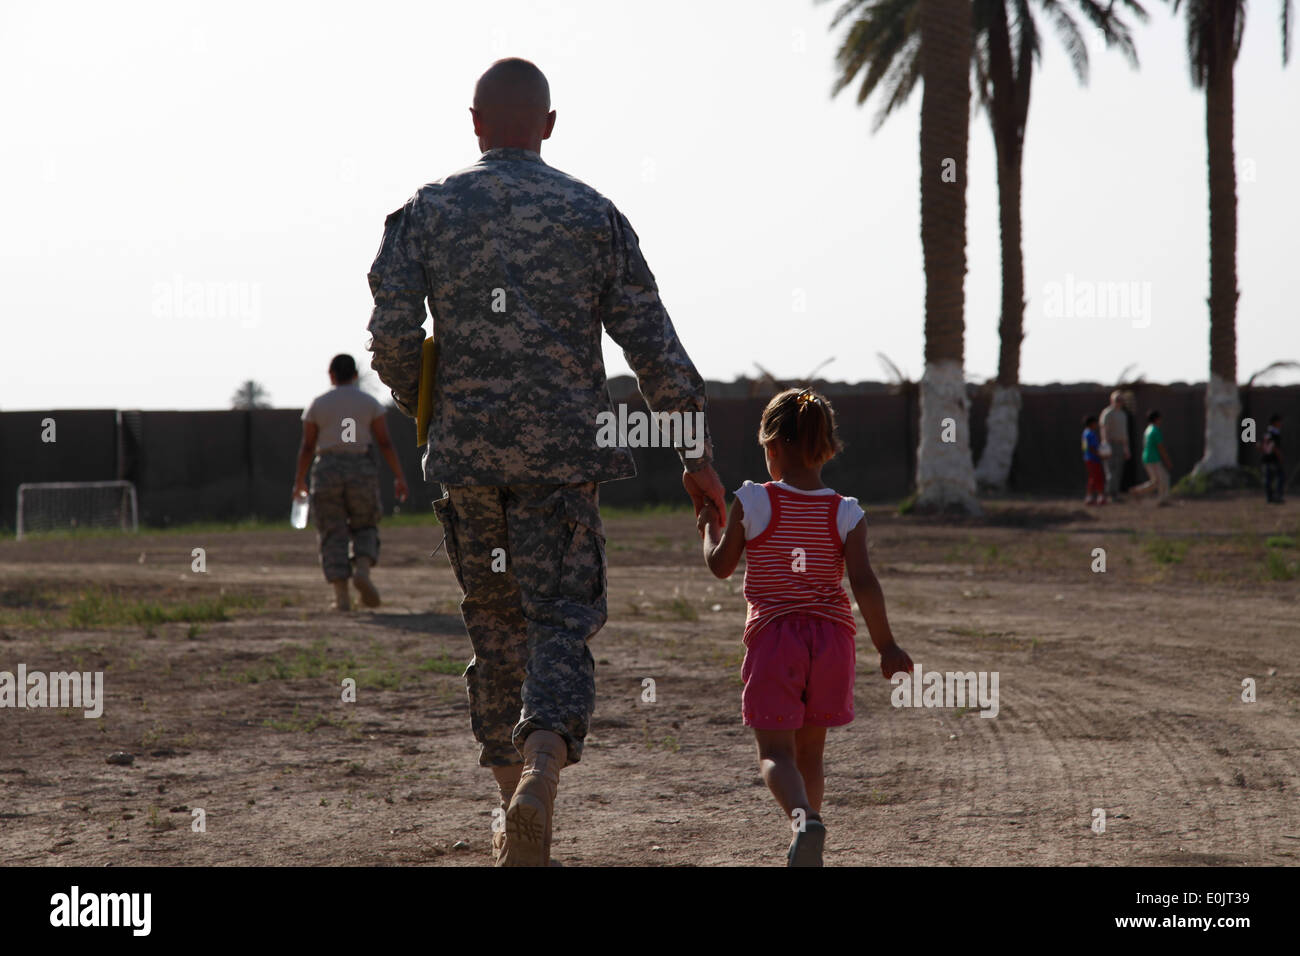 U.S. Army Maj. Gary Farley, chairman of the Iraqi Scouting program in Baghdad walks hand-in-hand with a young girl during the t Stock Photo